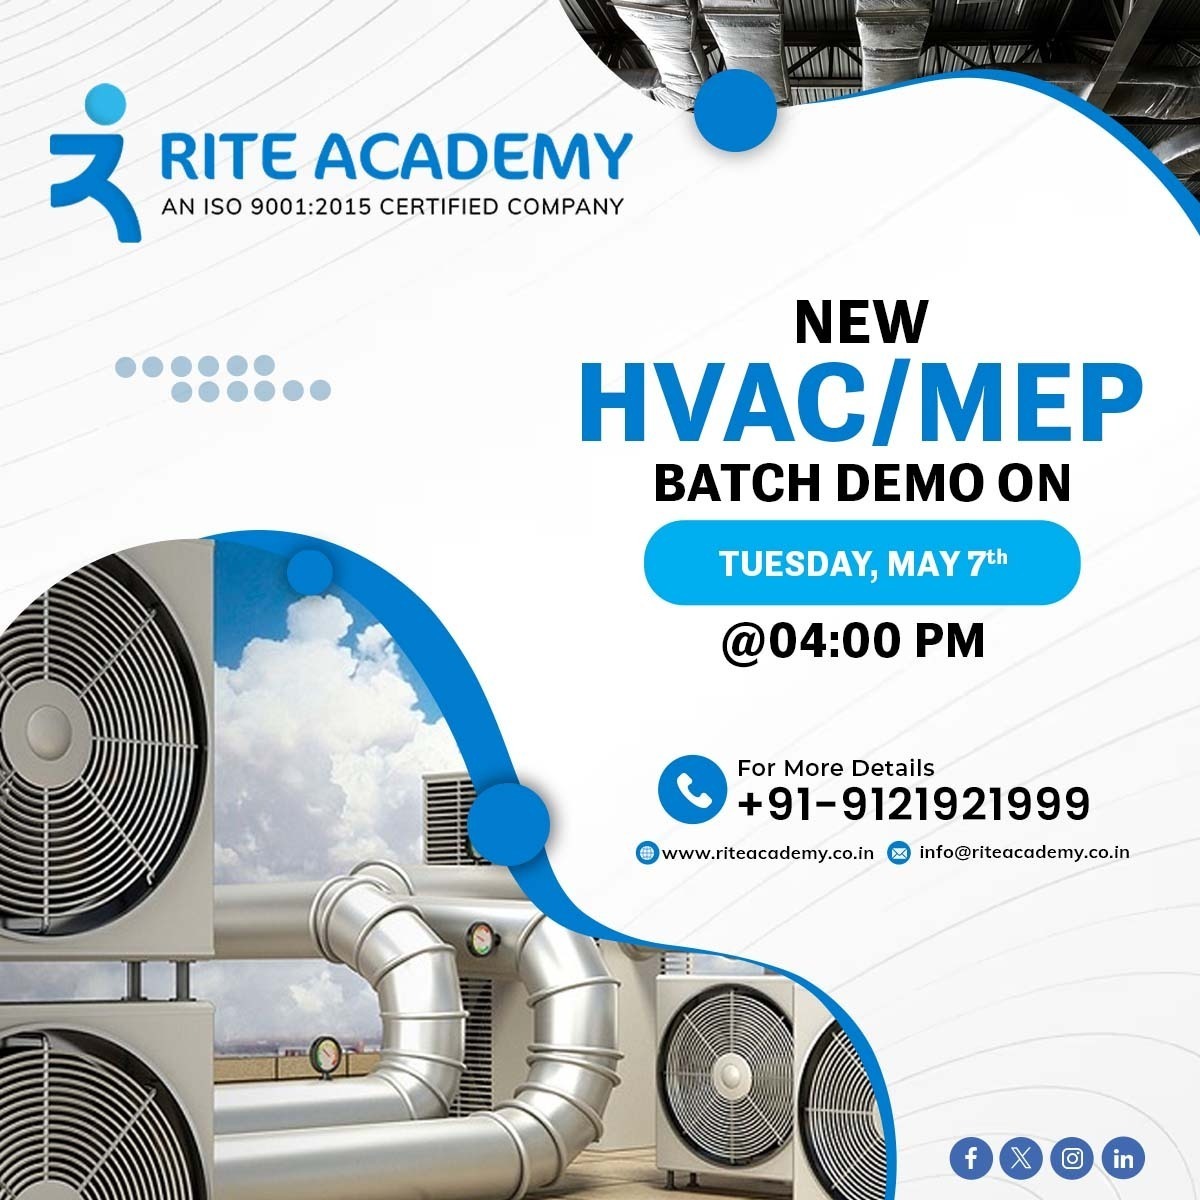 Hey, you! Ready to level up your skills? Don't miss the FREE demo of HVAC/MEP #course in Hyderabad on May 7th.

Visit our website to secure your reservation or give us a call to register at the Best #HVAC and #MEP training Academy in #Hyderabad.

#mep #mepcourse #riteacademy